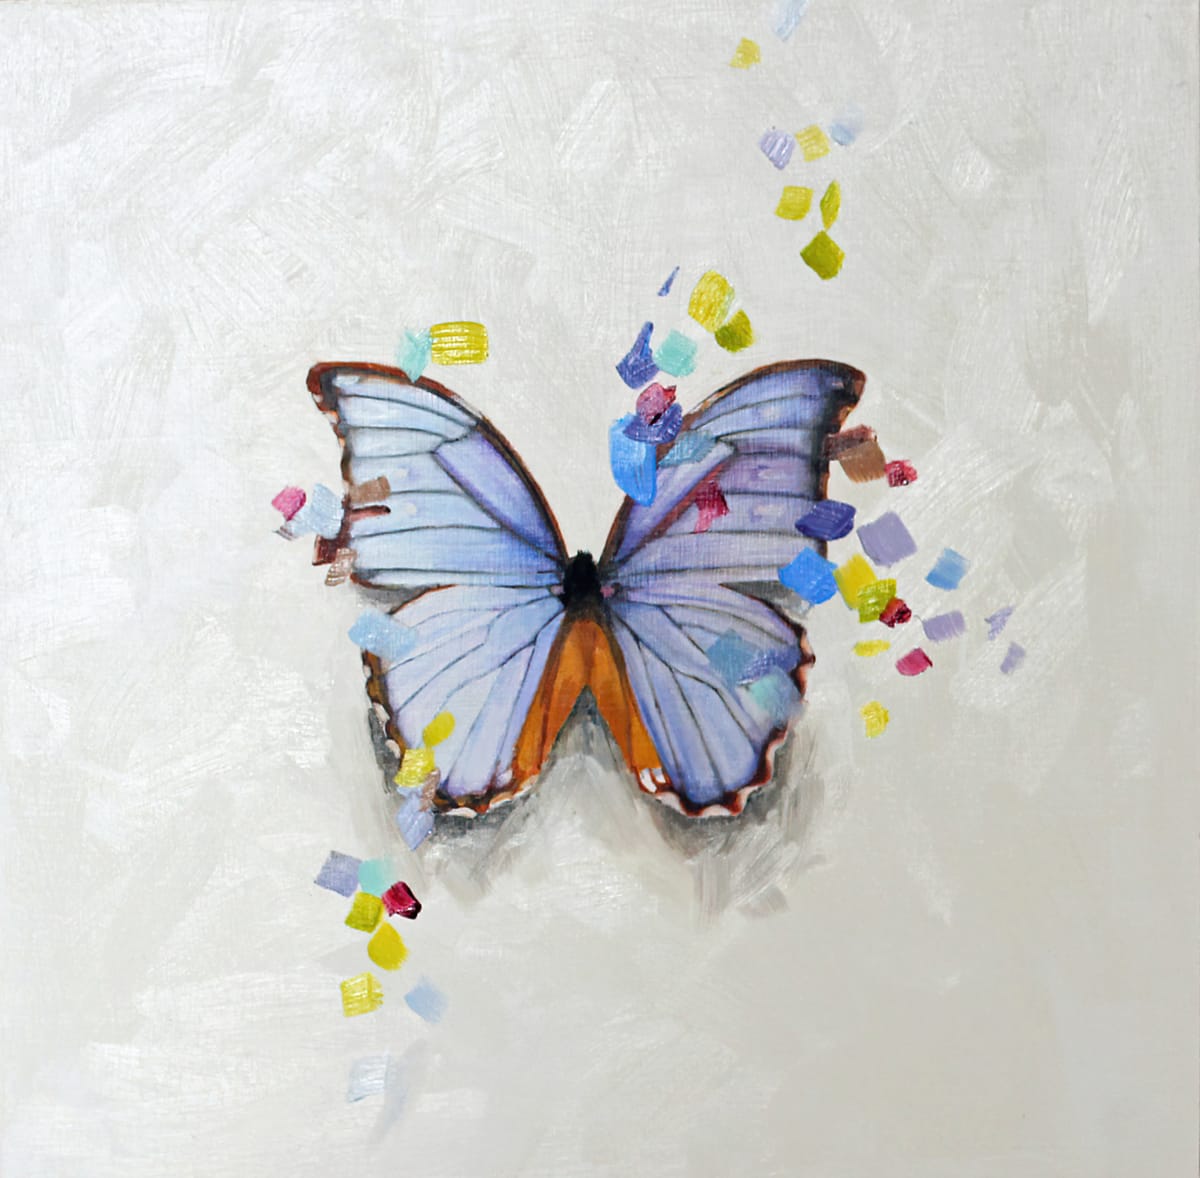 Confetti  Image: oil painting on wood panel, 12 x 12 inches